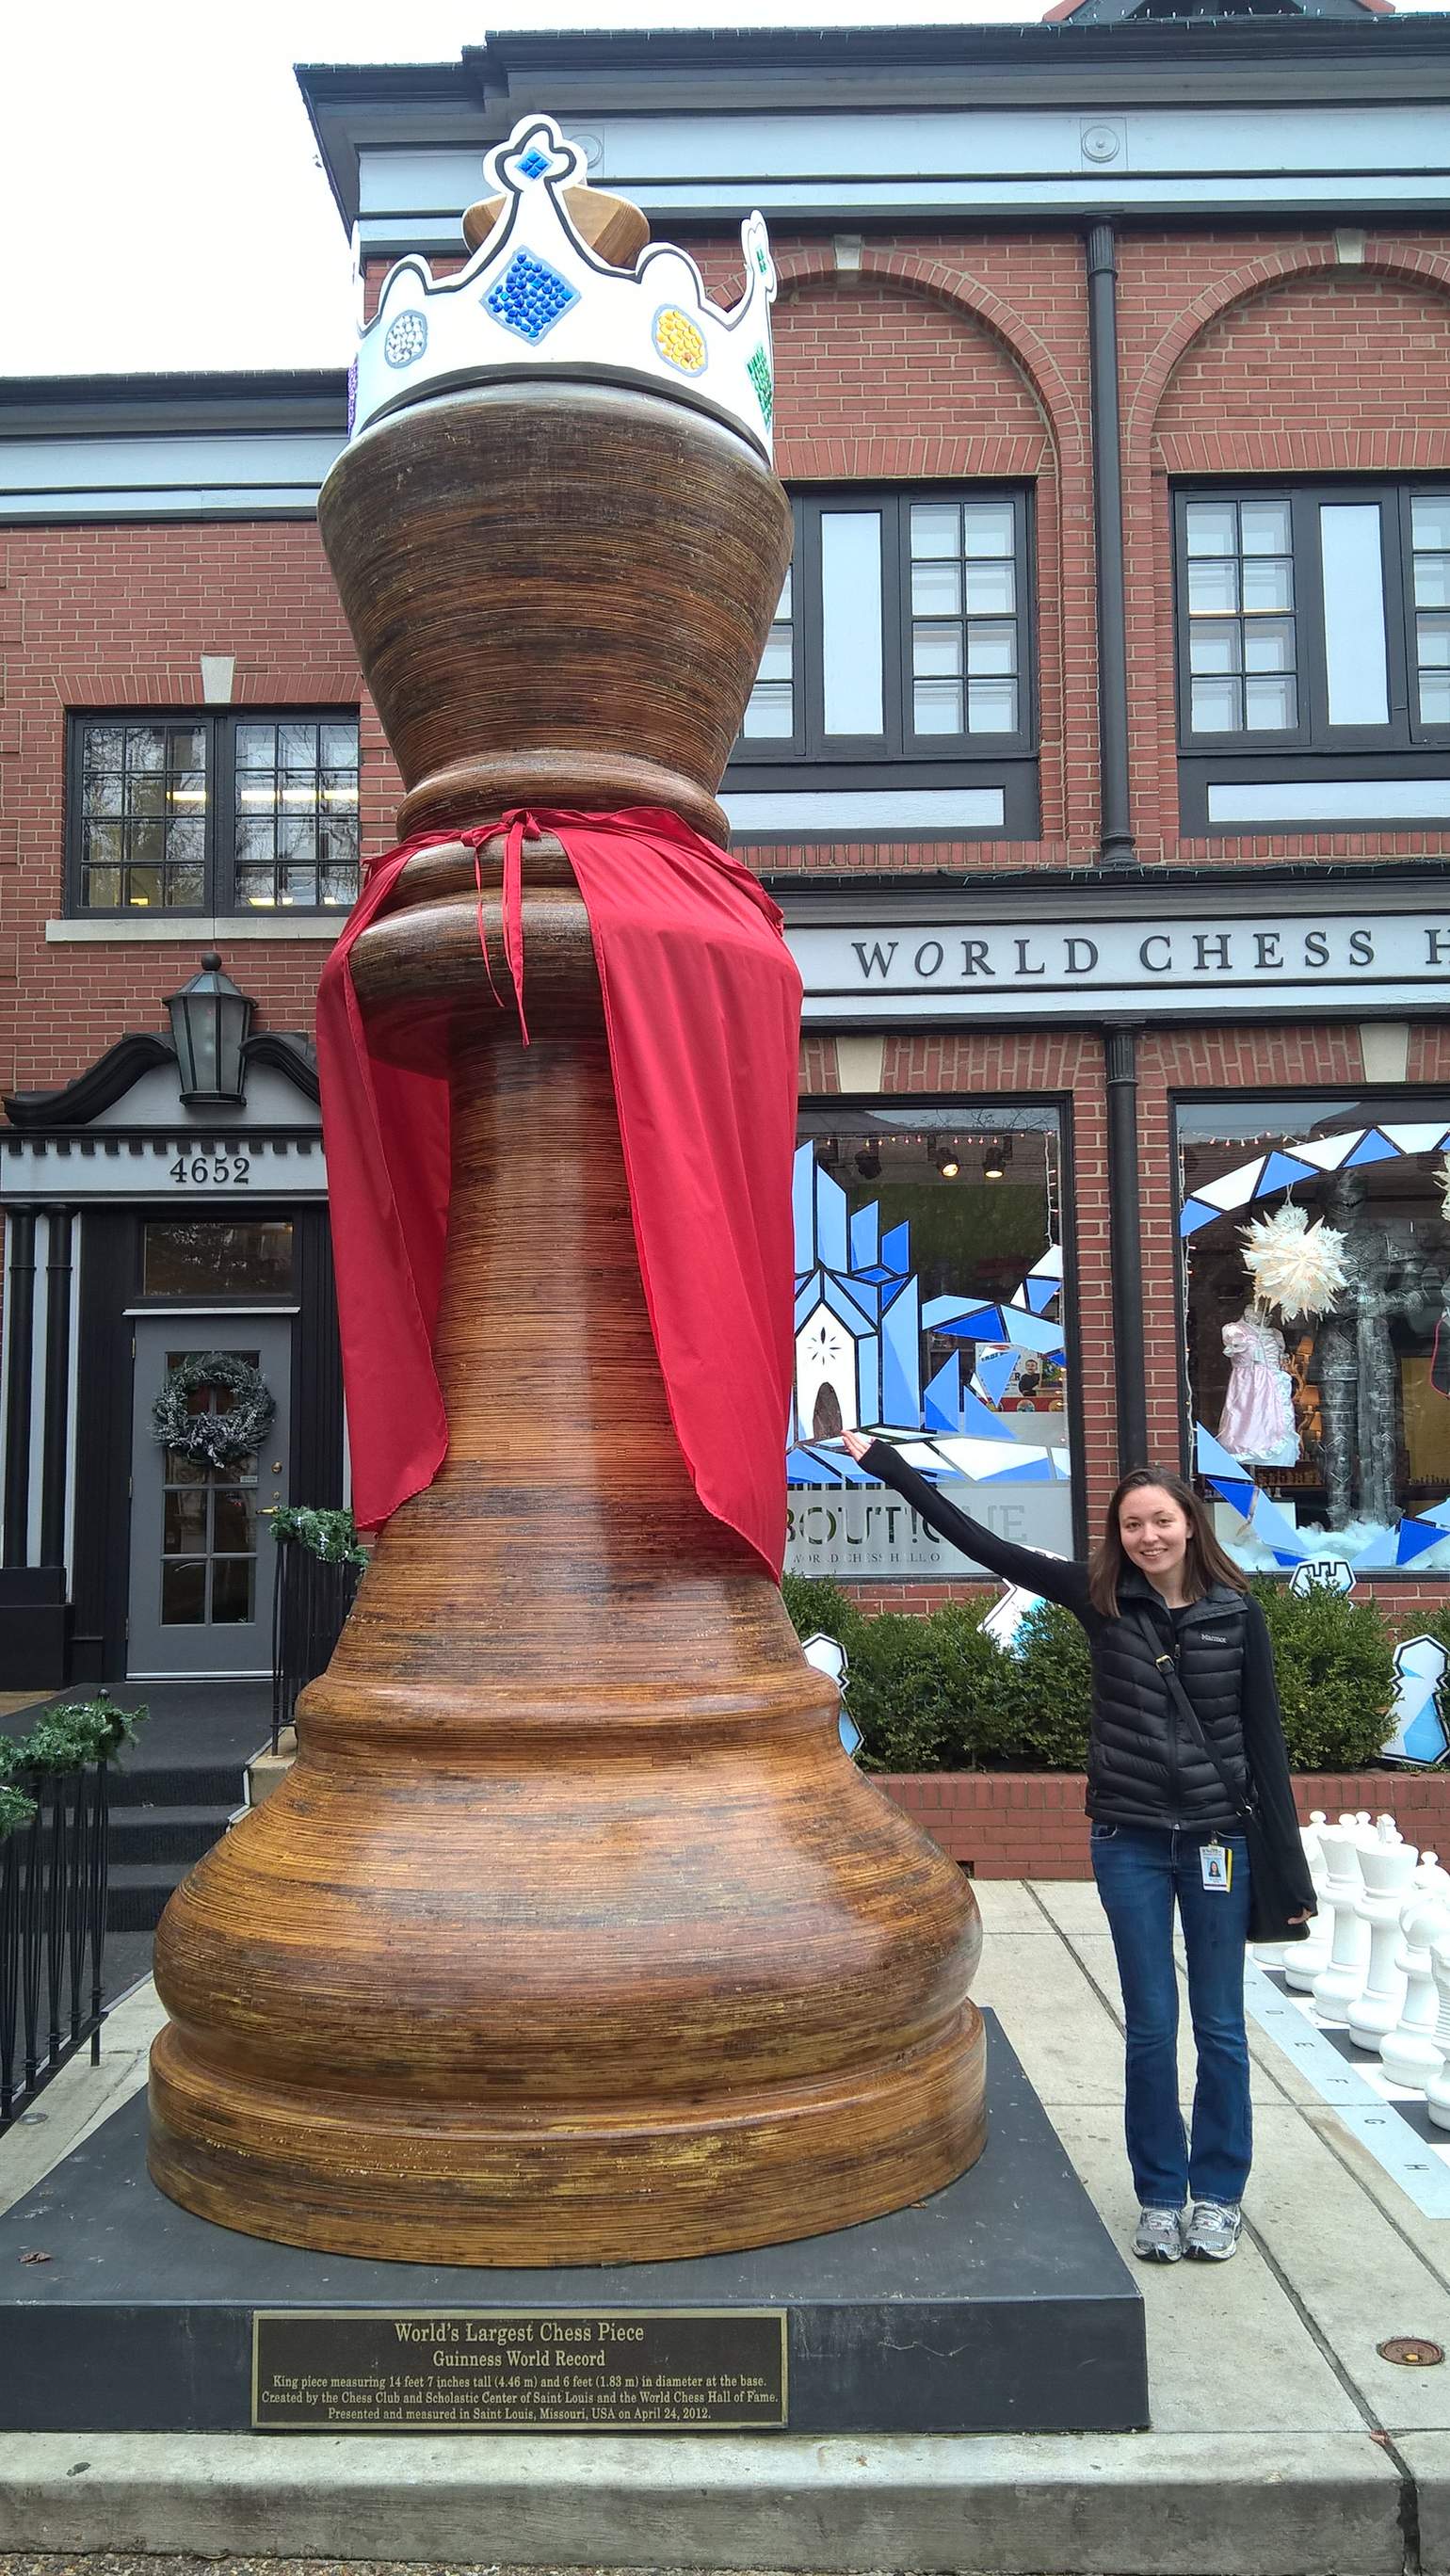 Image: giant chess piece, holiday decorations, World Chess Hall of Fame